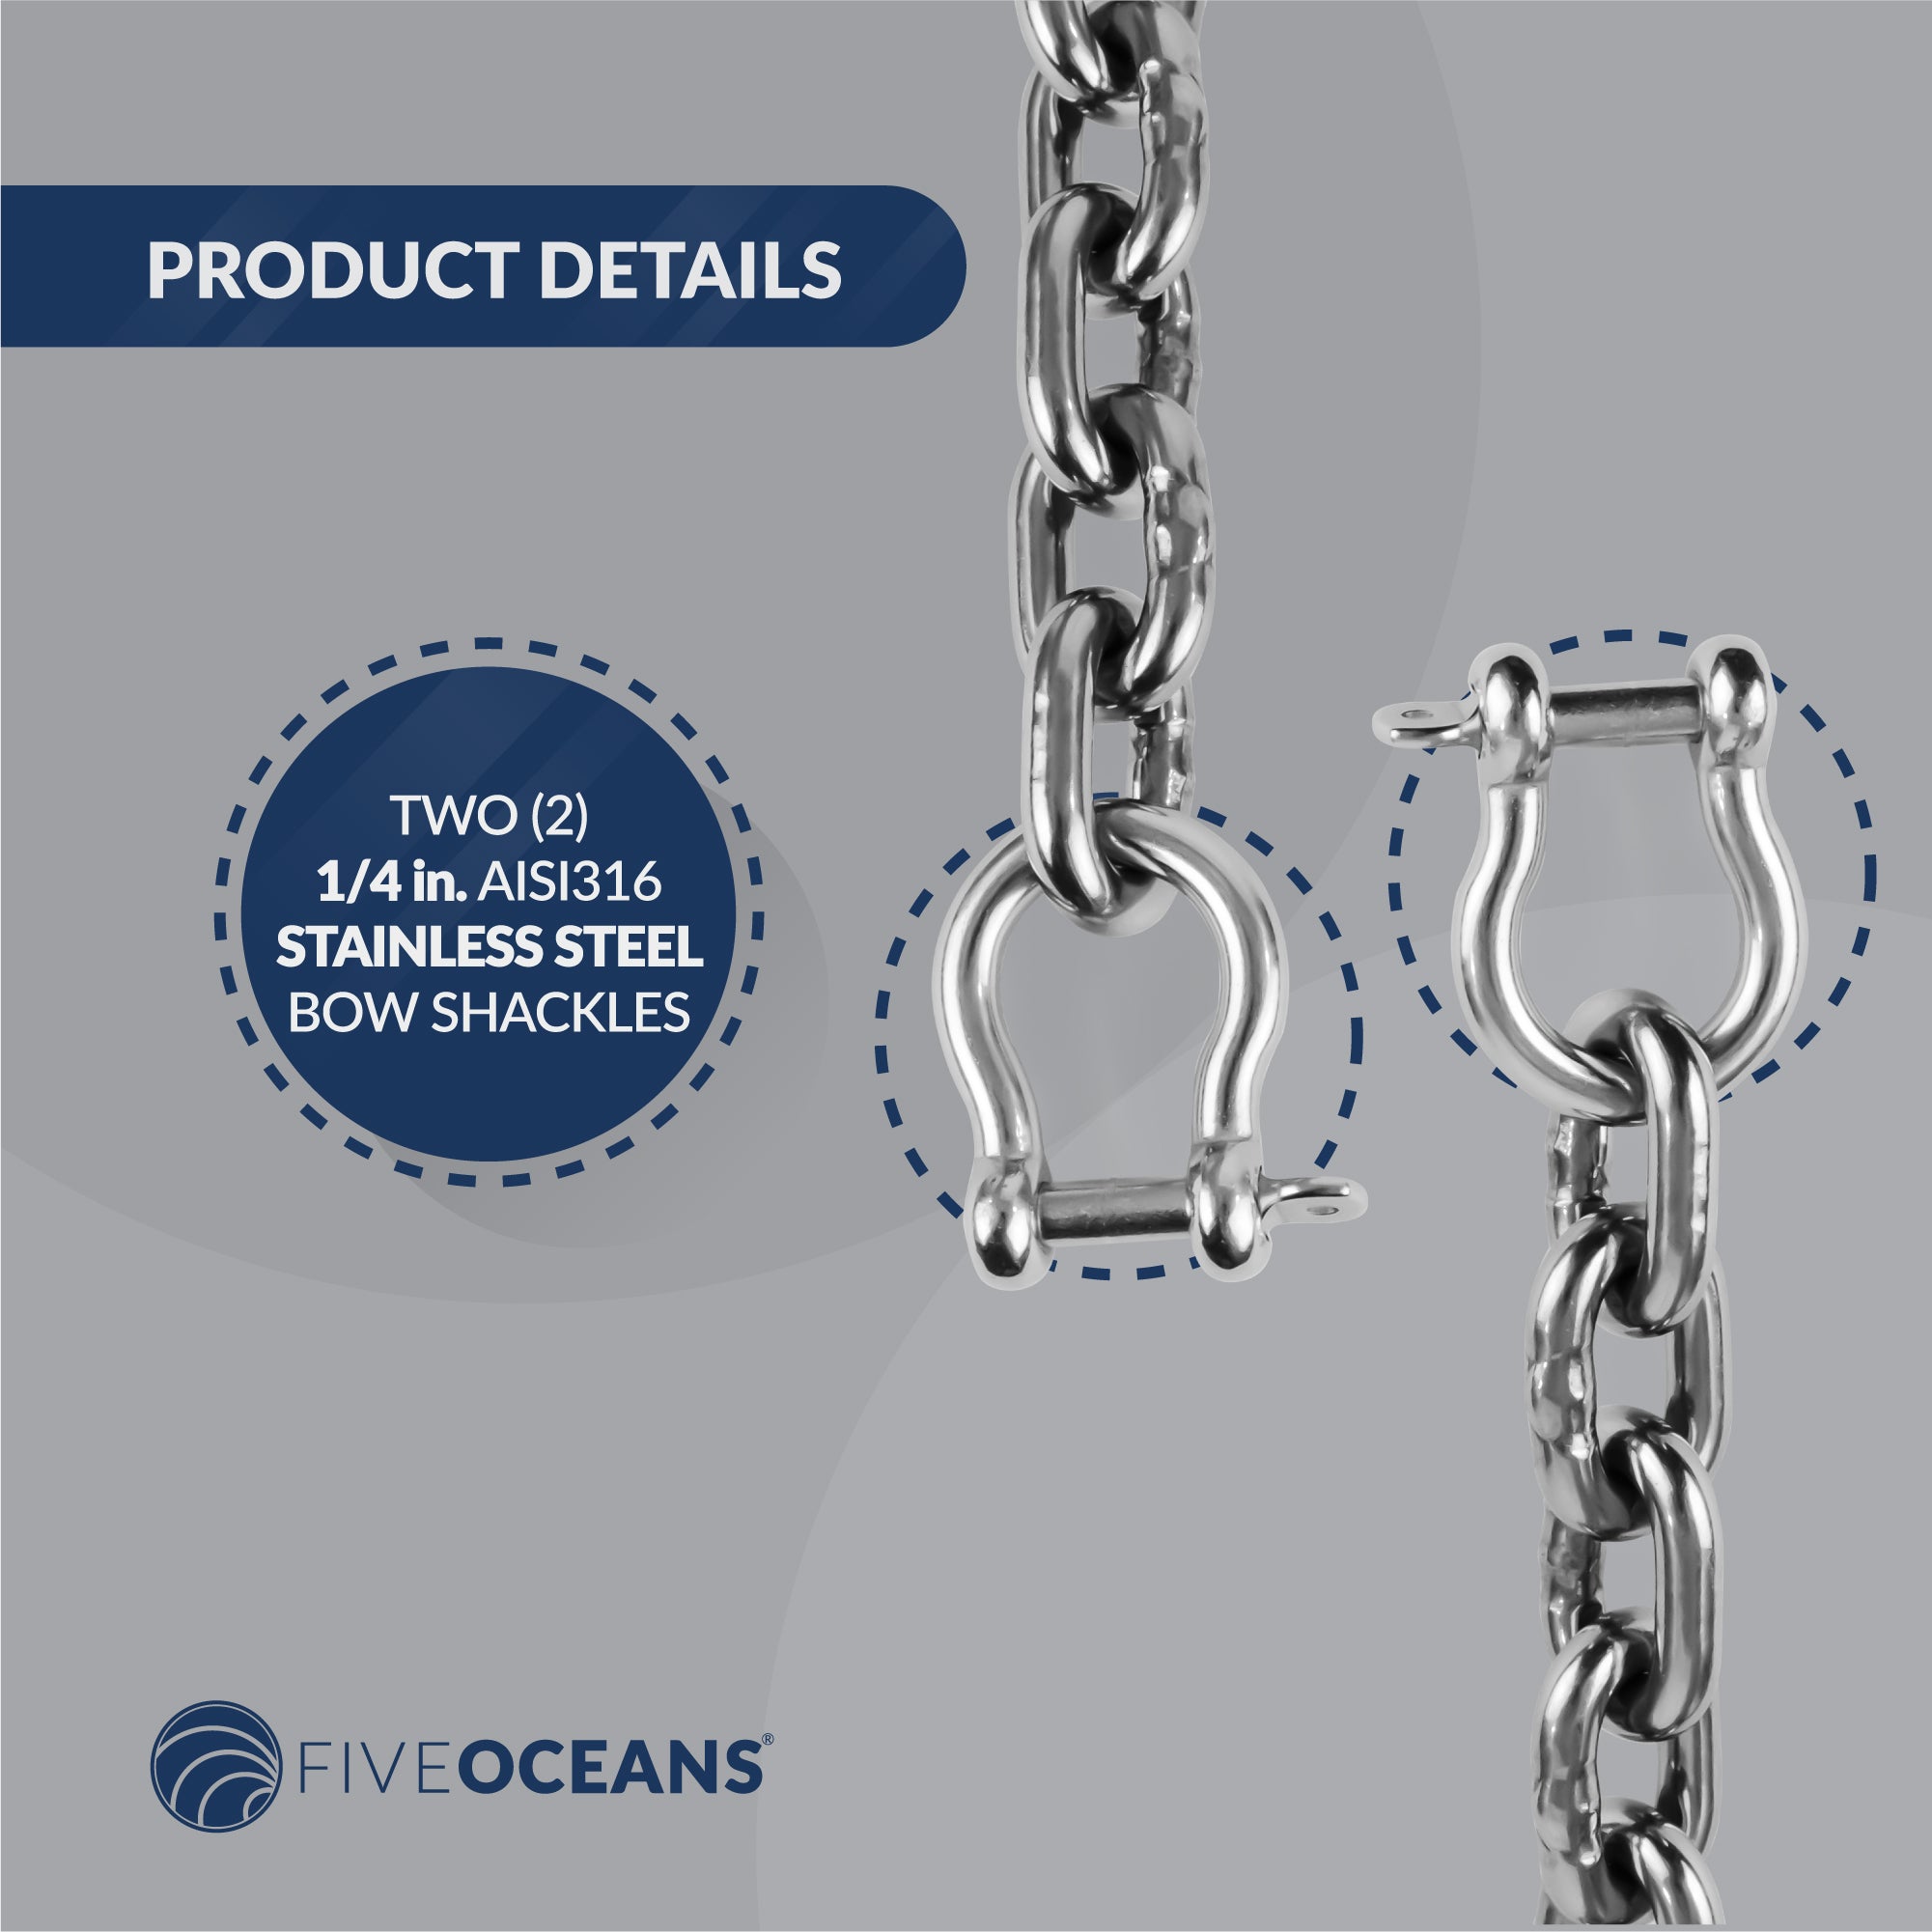 Anchor Lead Chain 1/4" x 5', HTG4 Stainless Steel - FO4492-S5